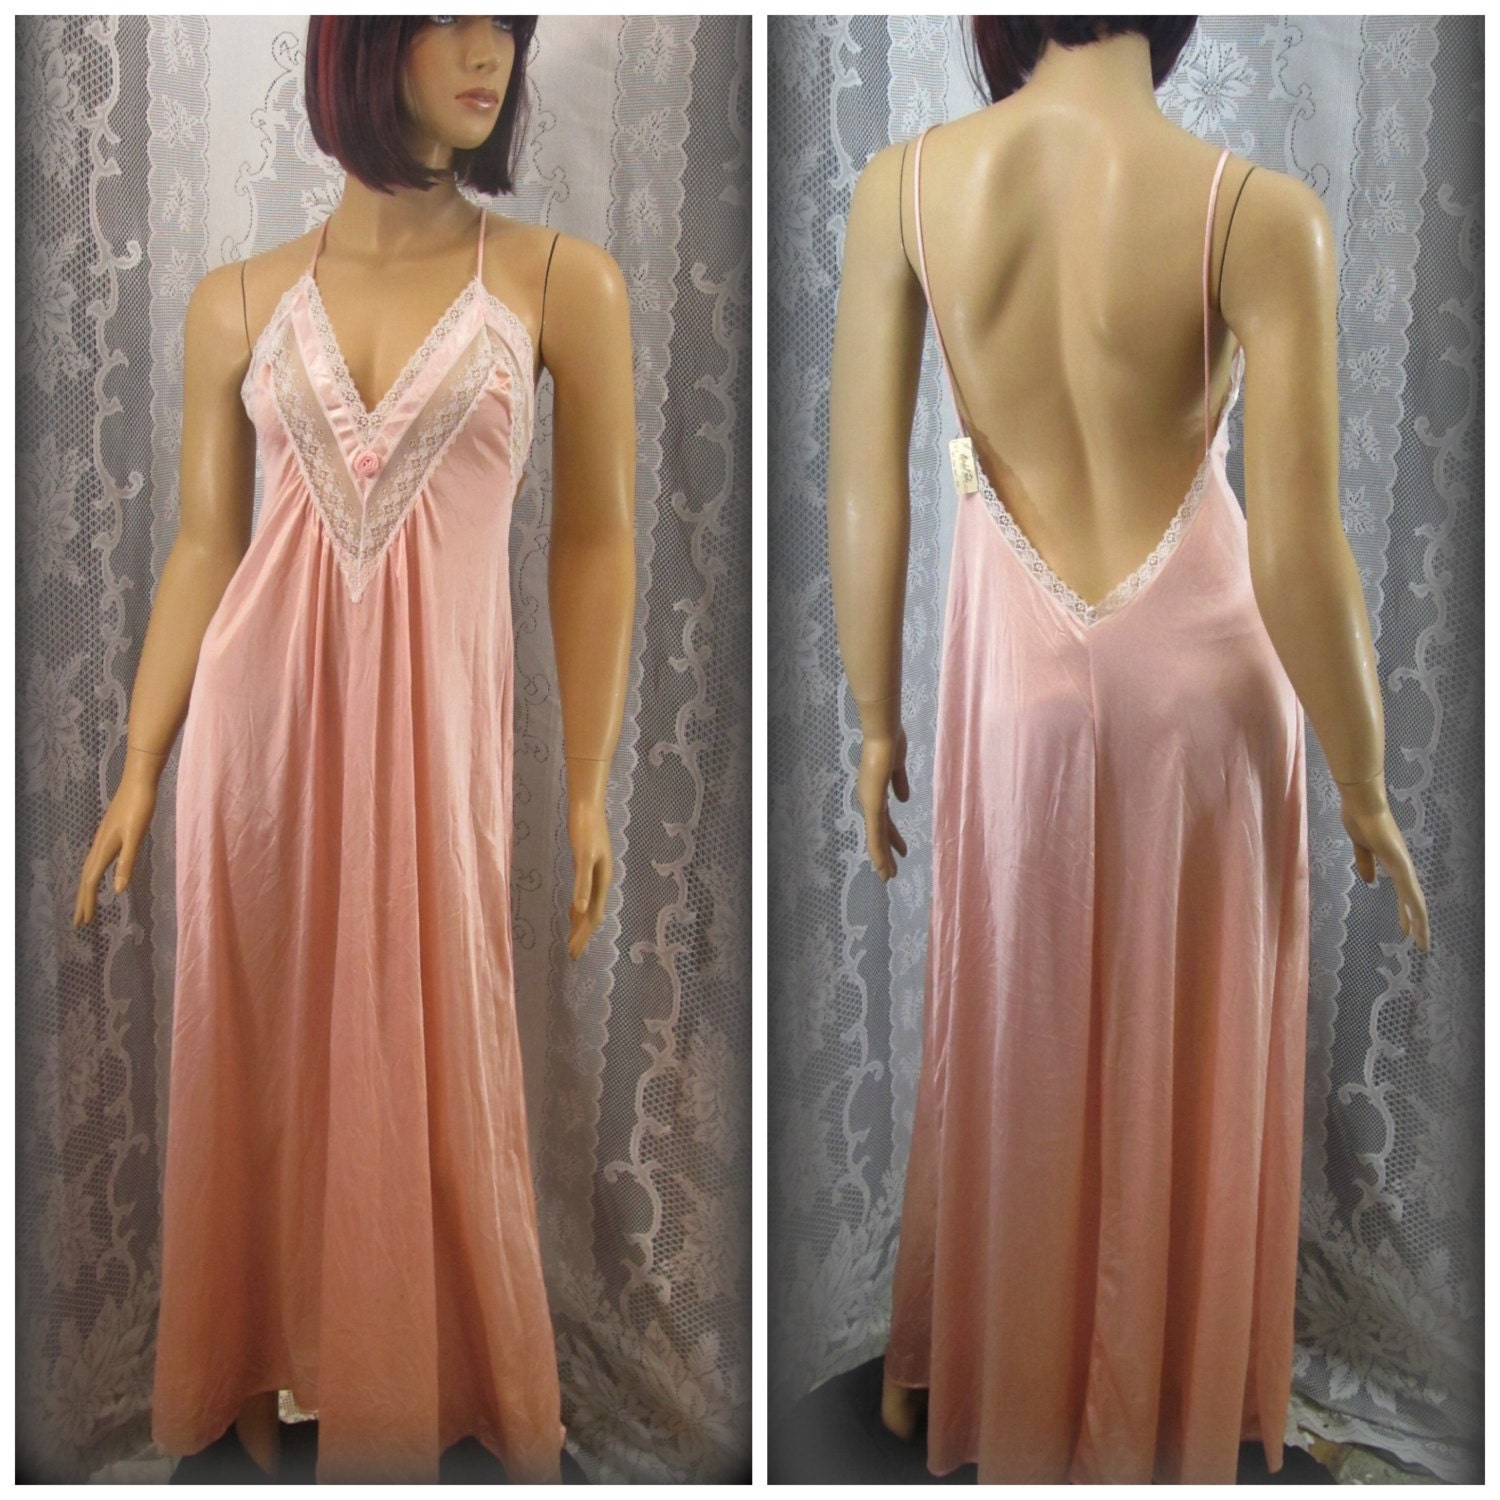 1951 sexy nightgown Long nightgown Sexy lingerie Pink